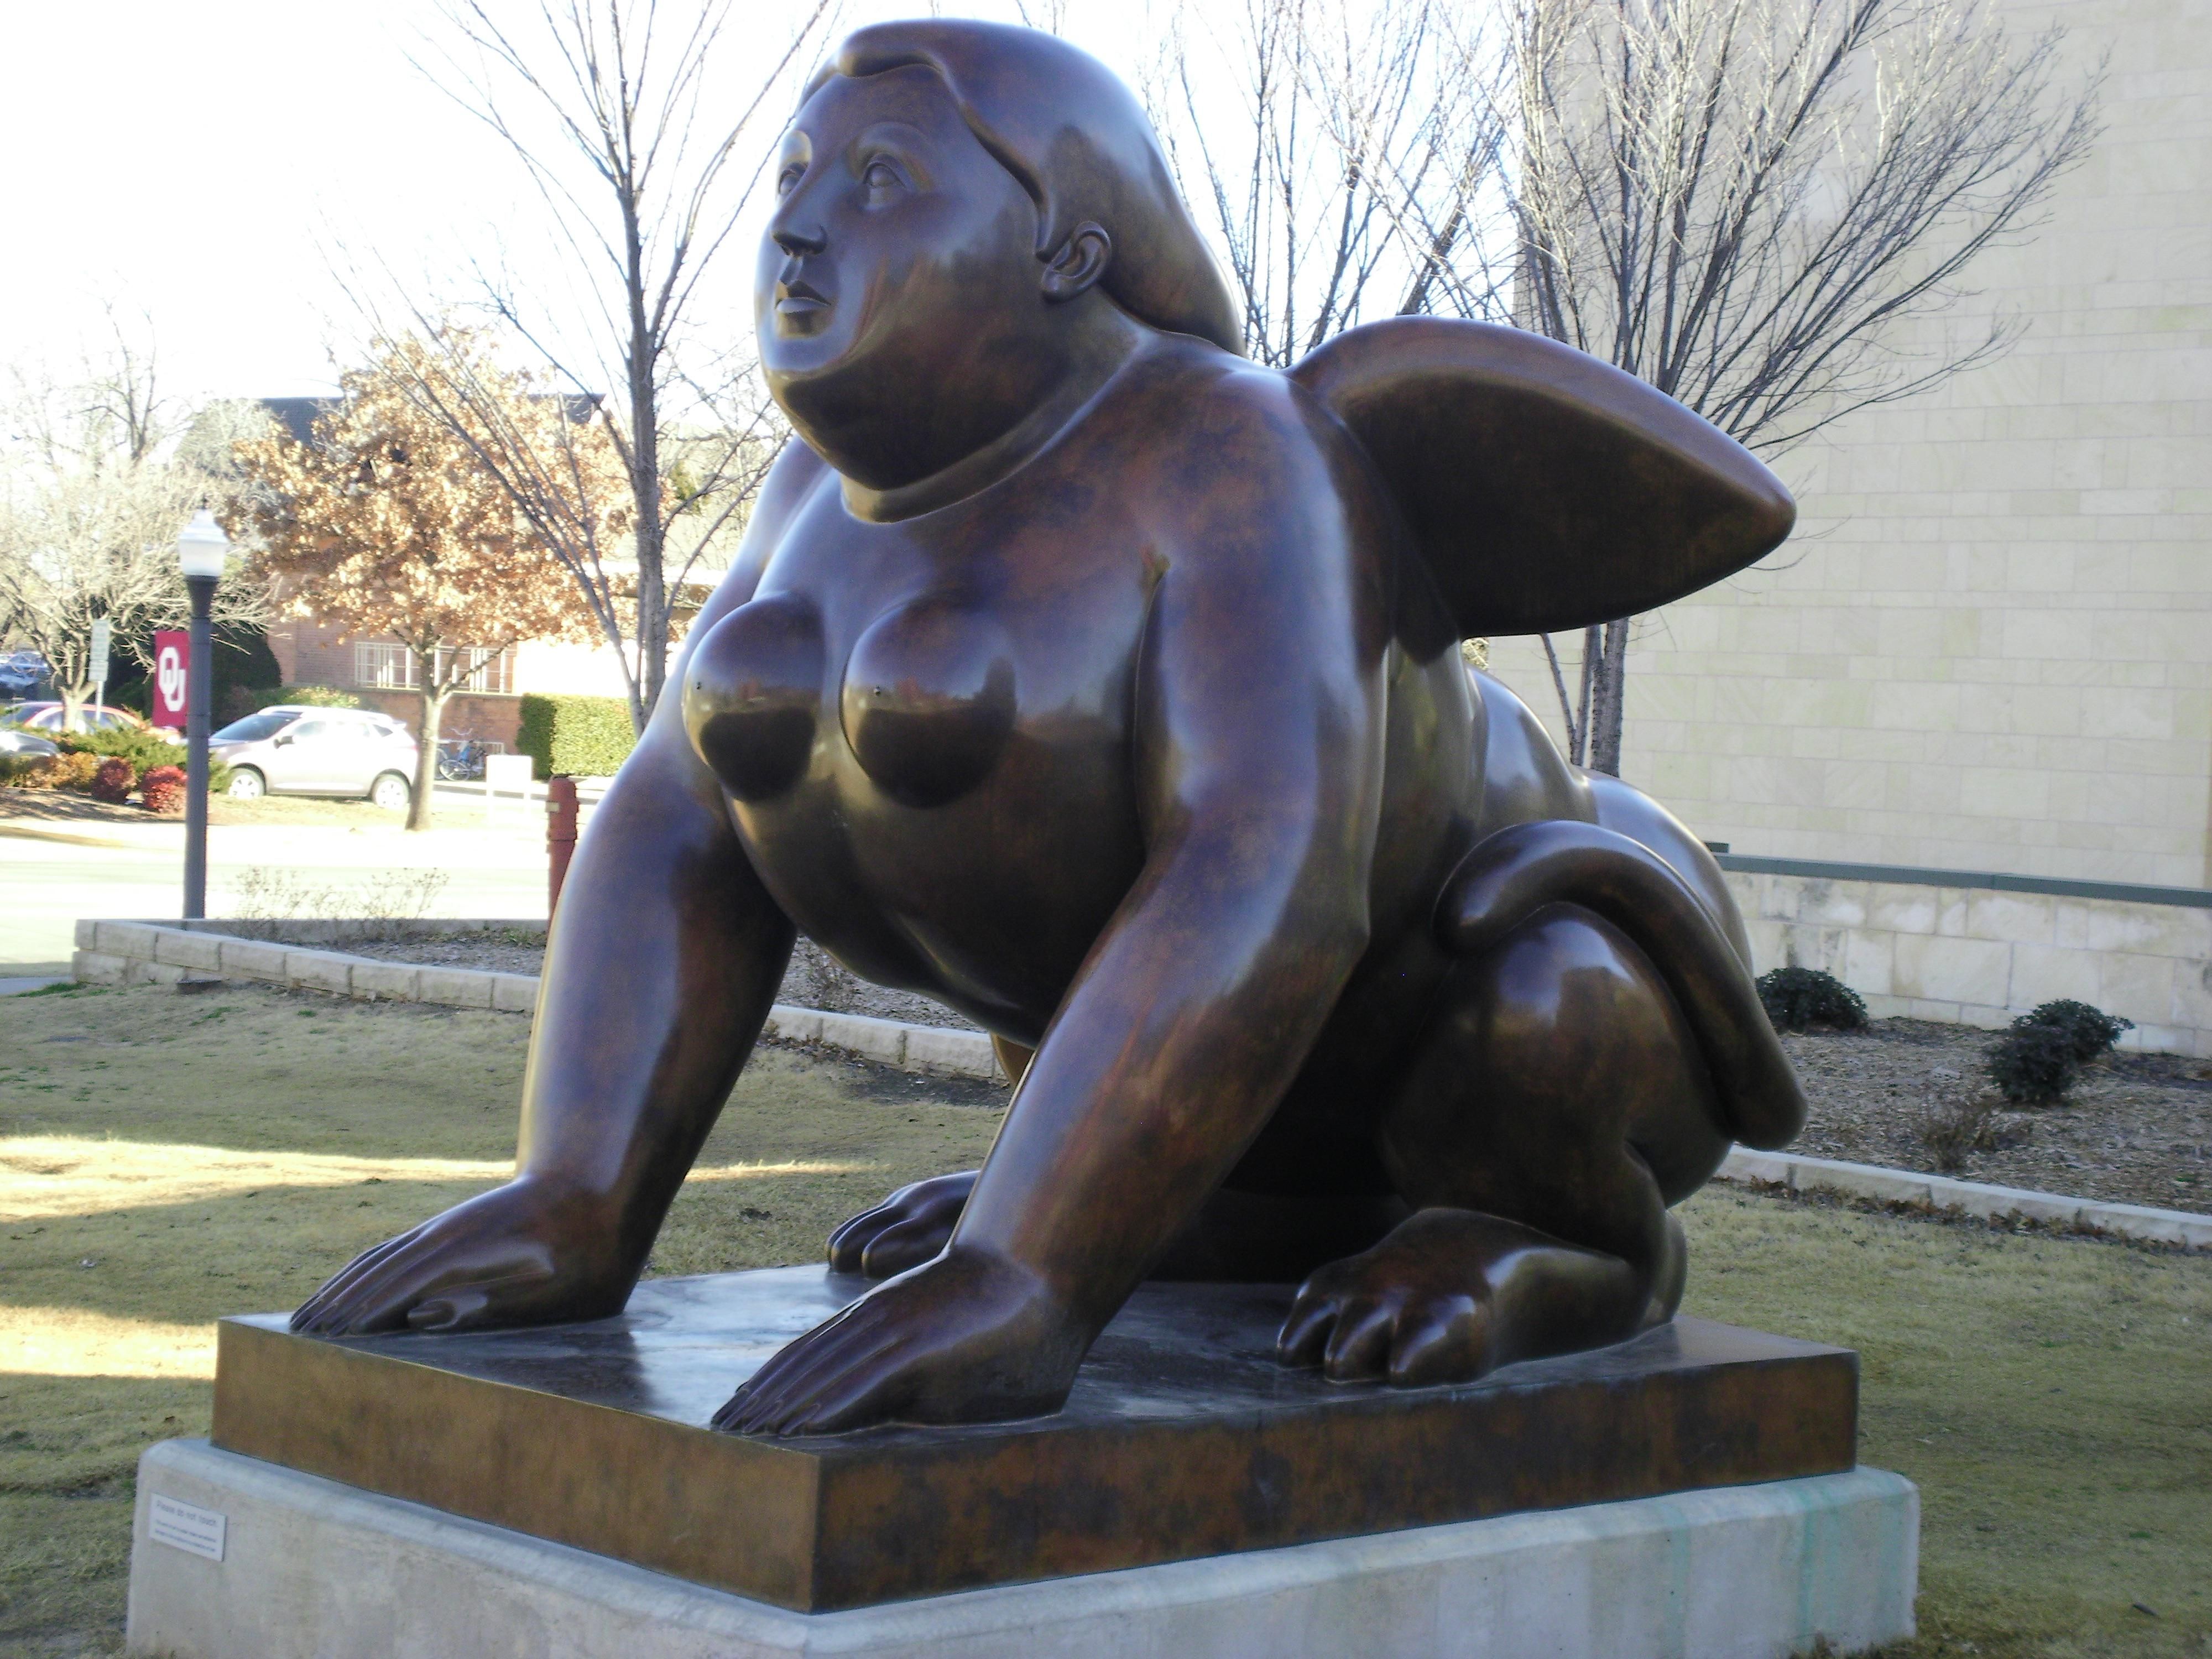 Y’all want bad sculptures? I give you the winner from my local college campus.